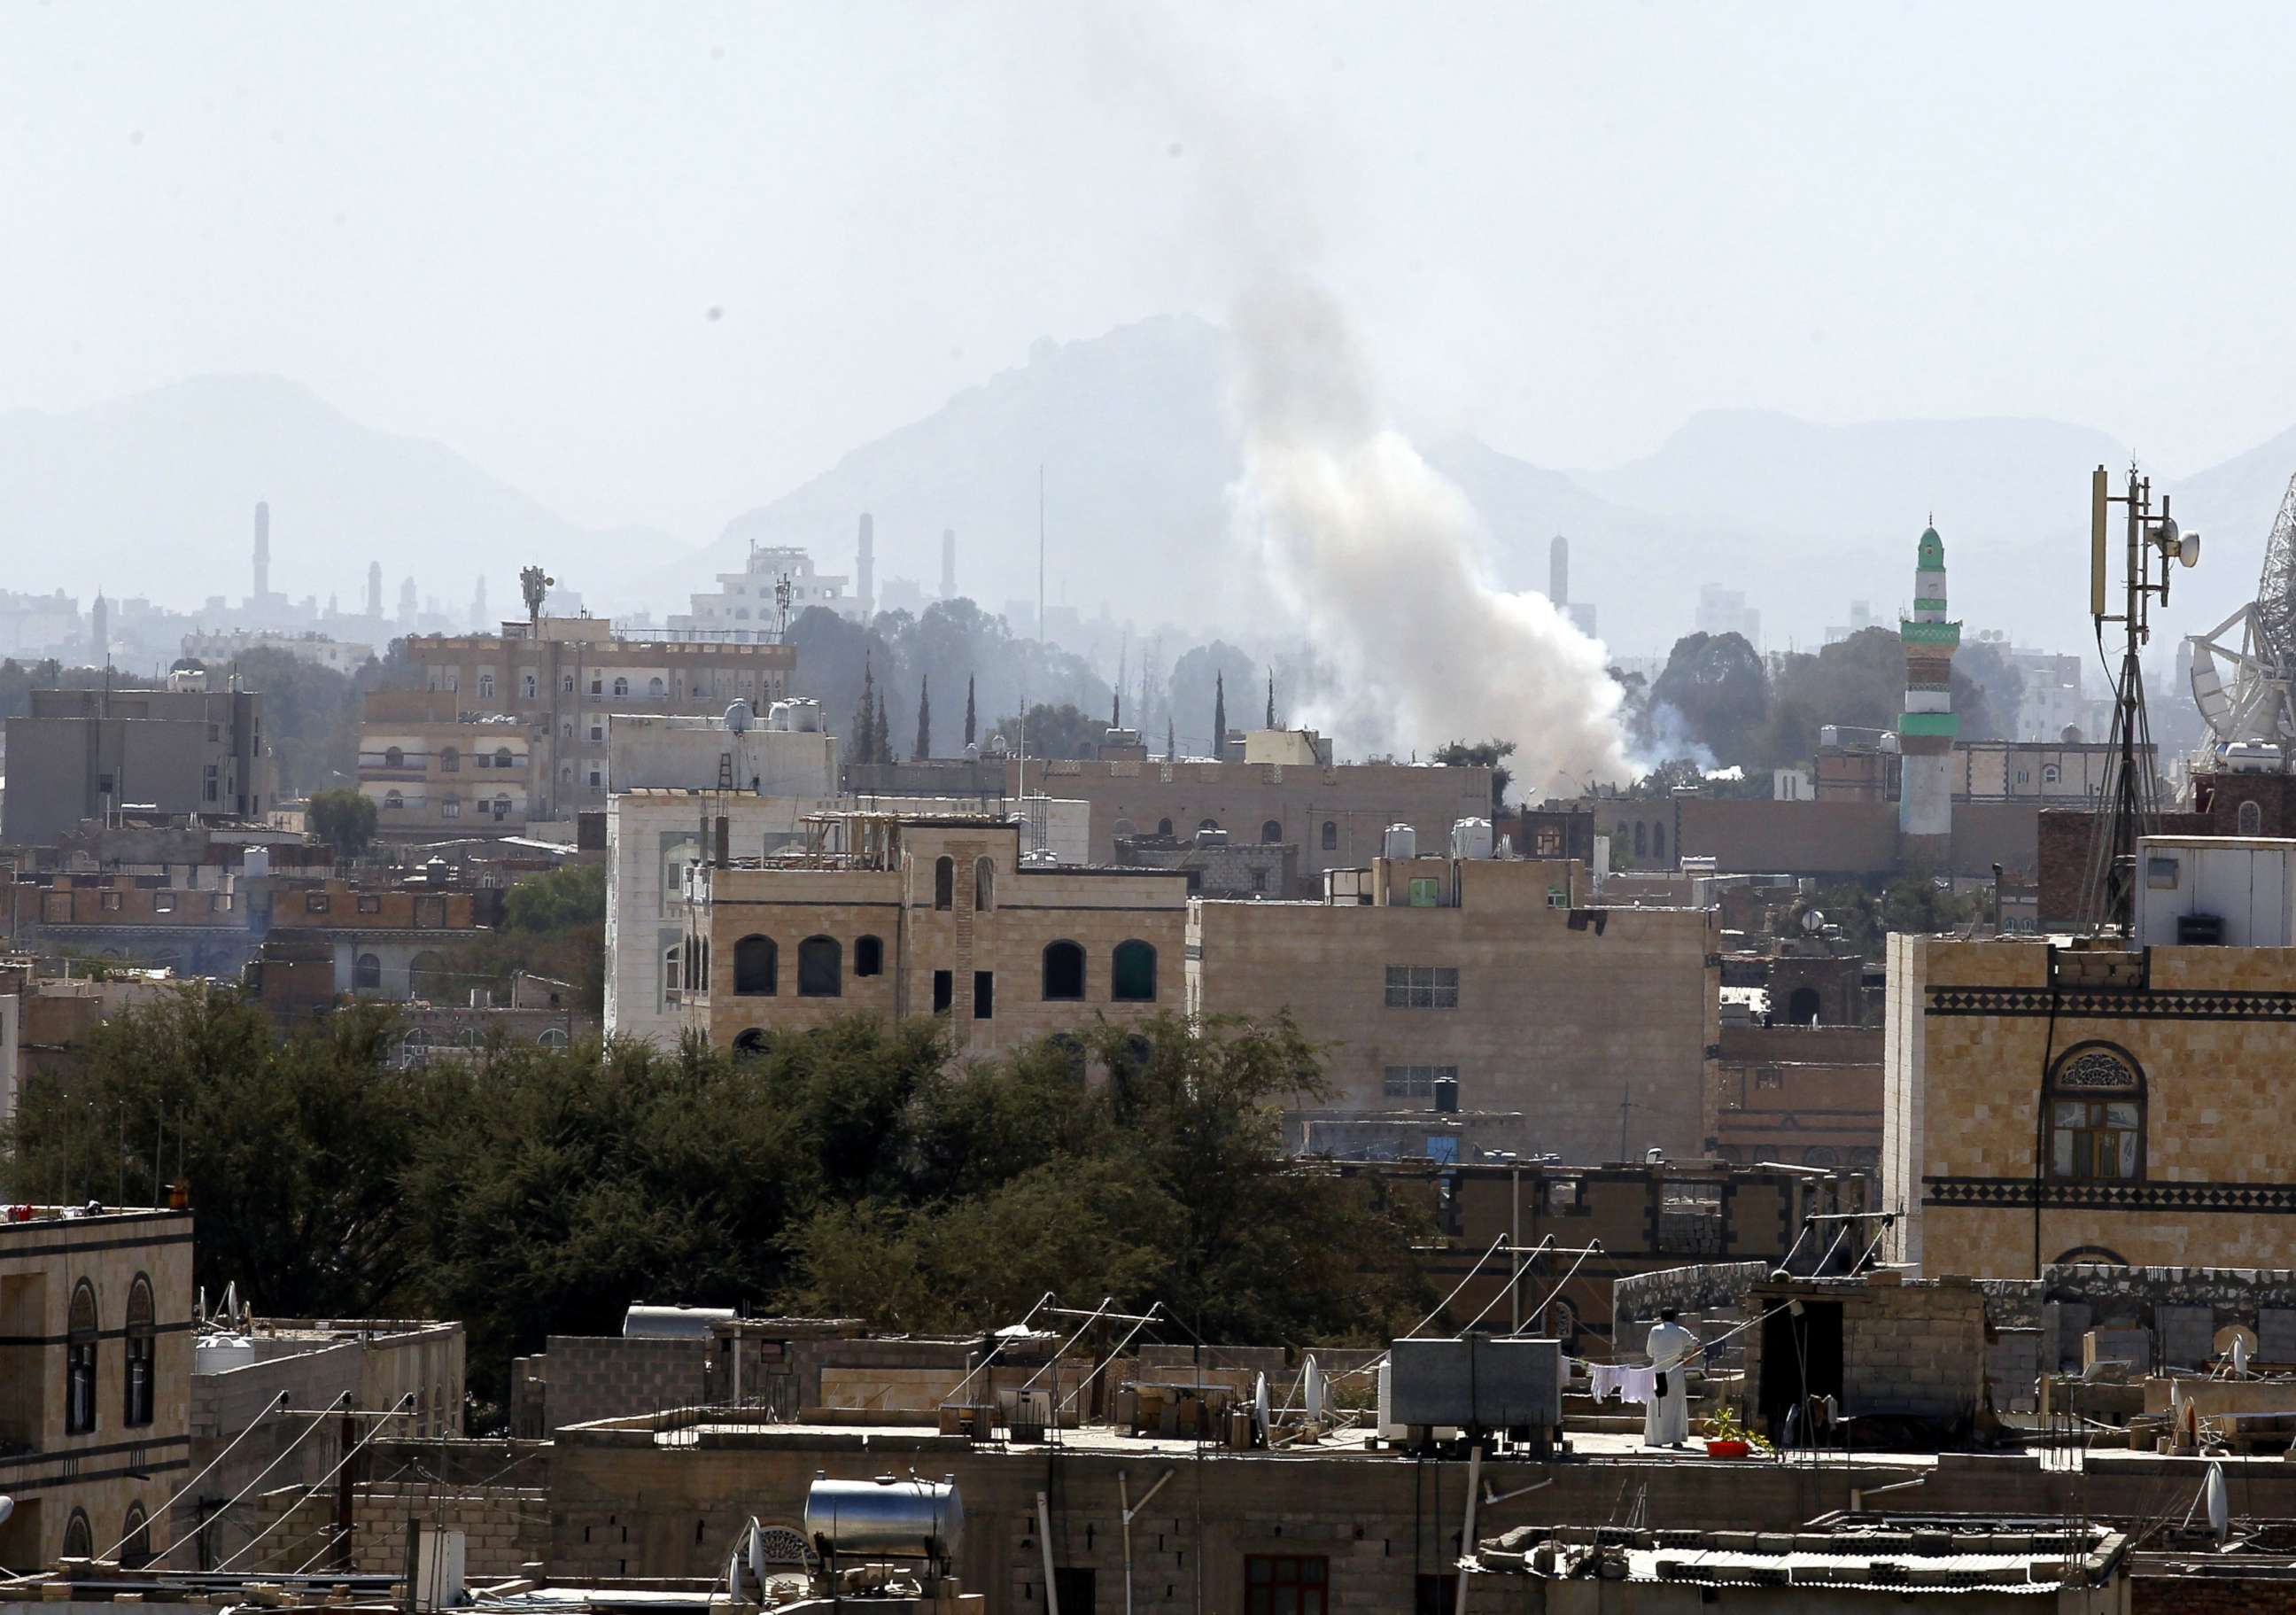 PHOTO: Smoke rises from explosions at a Houthi-held weapon depot a day after U.S. accused Iran of arming Houthi rebels with missiles, in Sana'a, Yemen, Dec. 15, 2017. 